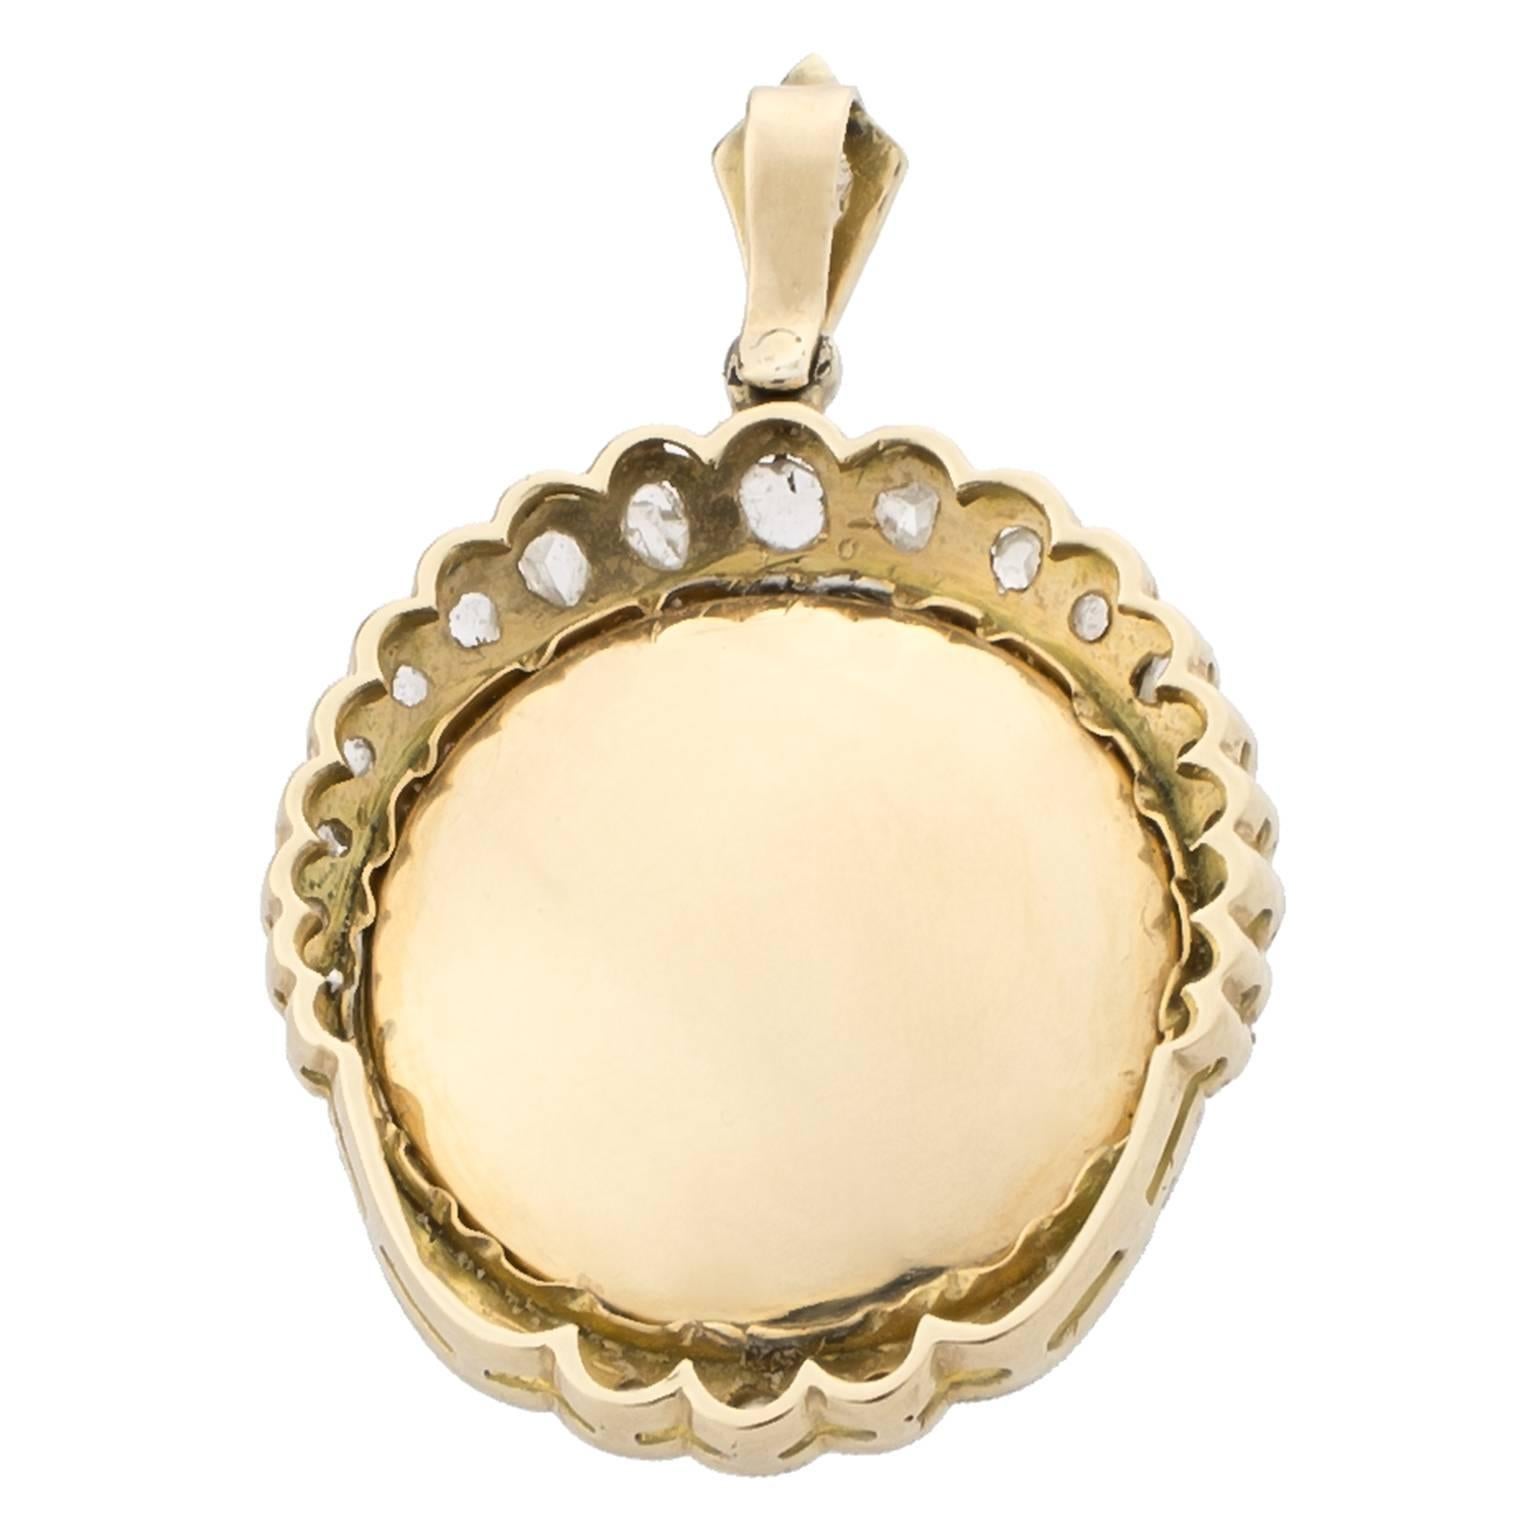 Early 20th century platinum-topped gold pendant with religious image in mother of pearl, surrounded by 0.10 carats in rose cut diamonds.
Dimensions: 21 x 19 mm (0.83 x 0.75 in) with a 7 mm (0.28 in) bale